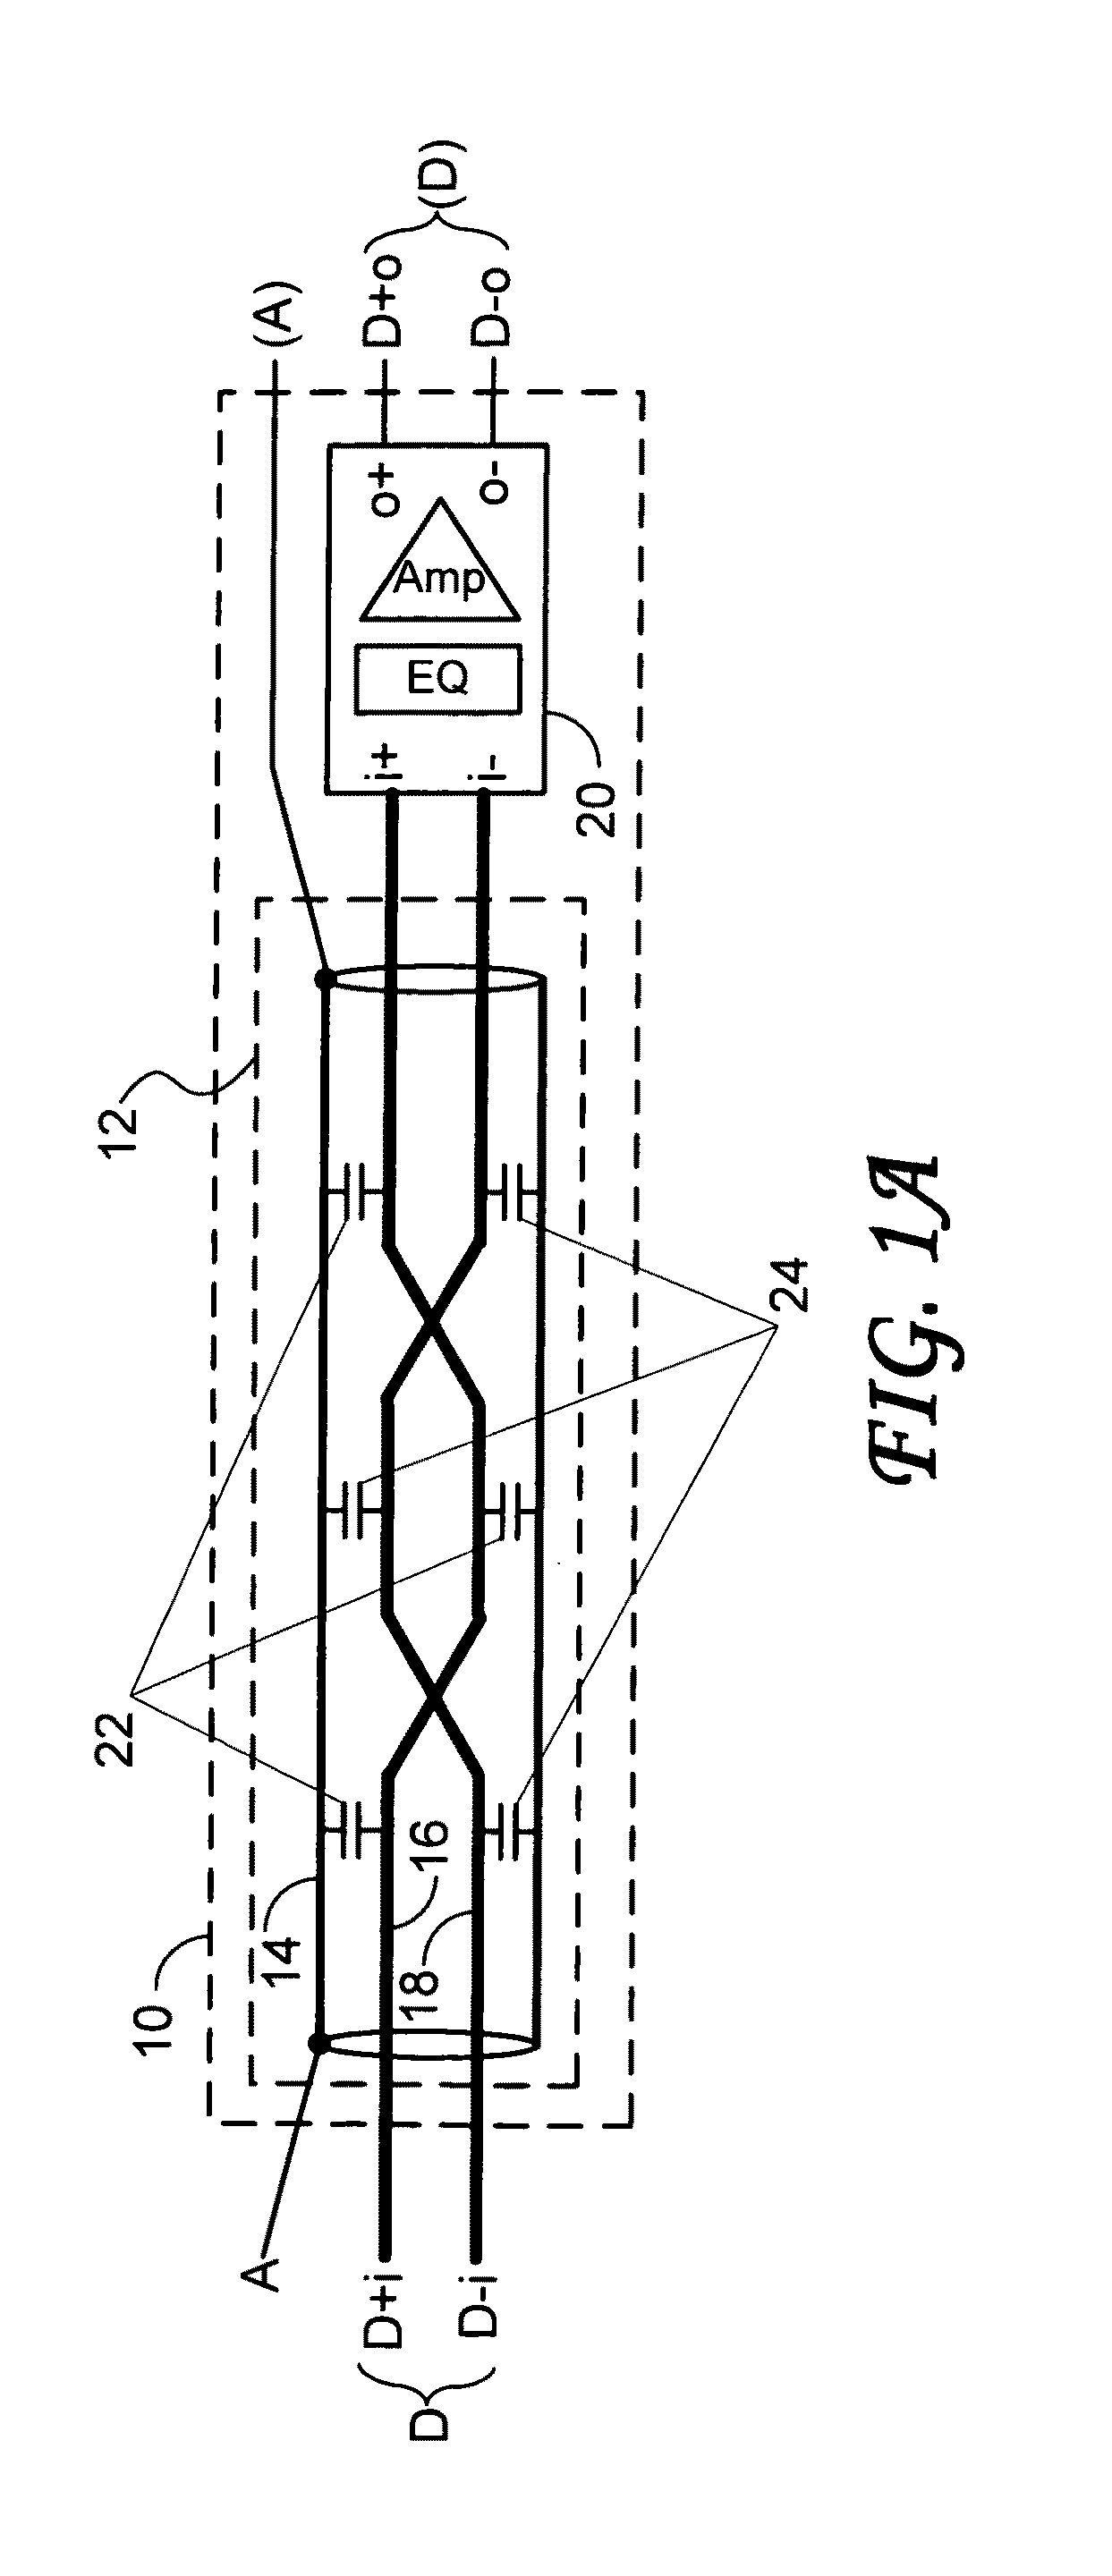 High speed data cable including a boost device for generating a differential signal